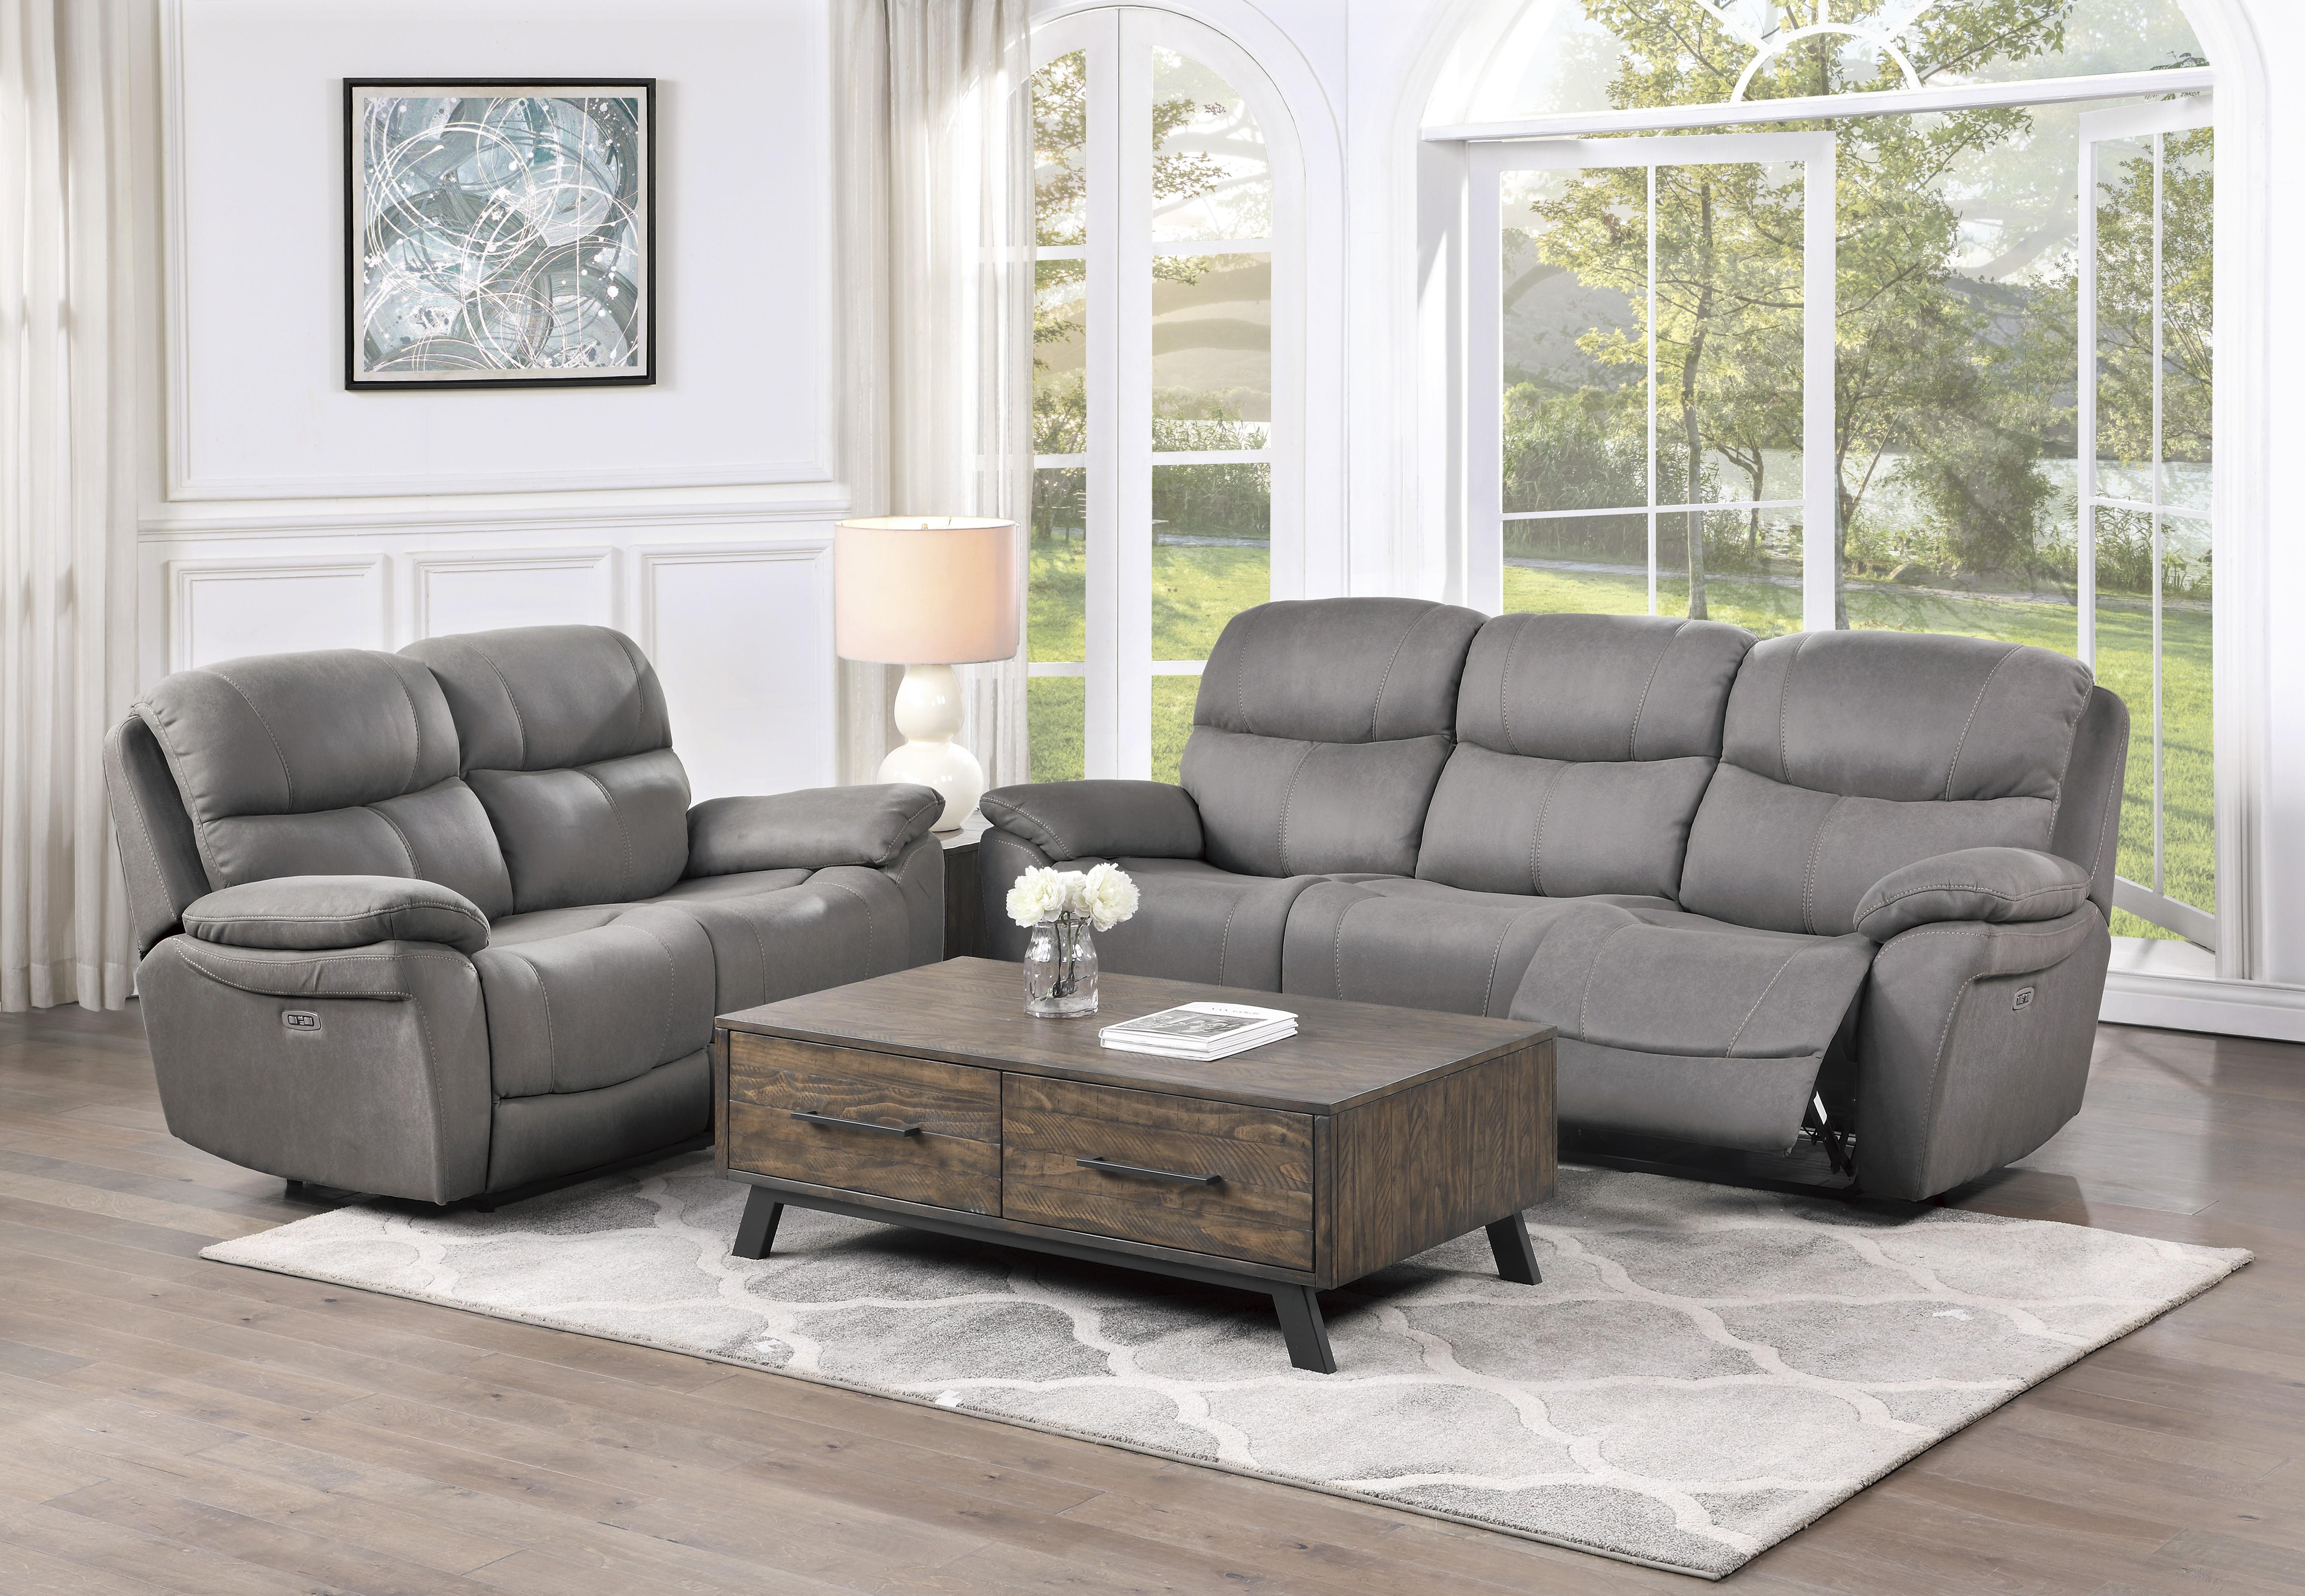 Transitional Power Reclining Sofa Set 9580GY-PWH-2PC Longvale 9580GY-PWH-2PC in Gray Microfiber